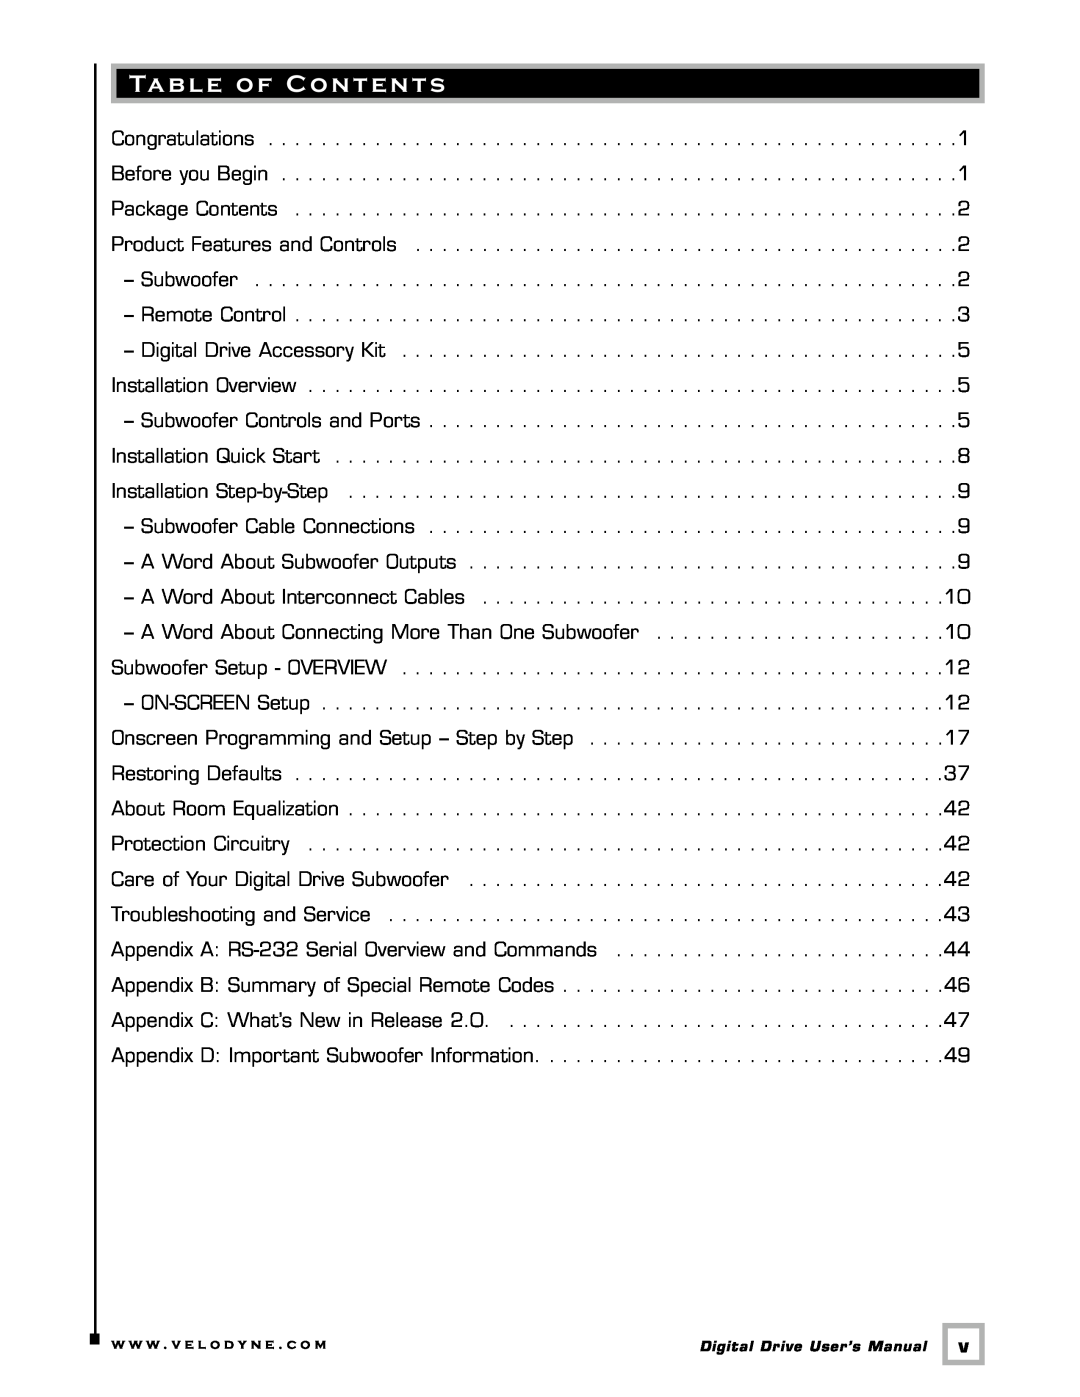 Velodyne Acoustics Digital Drive user manual Table of Contents 